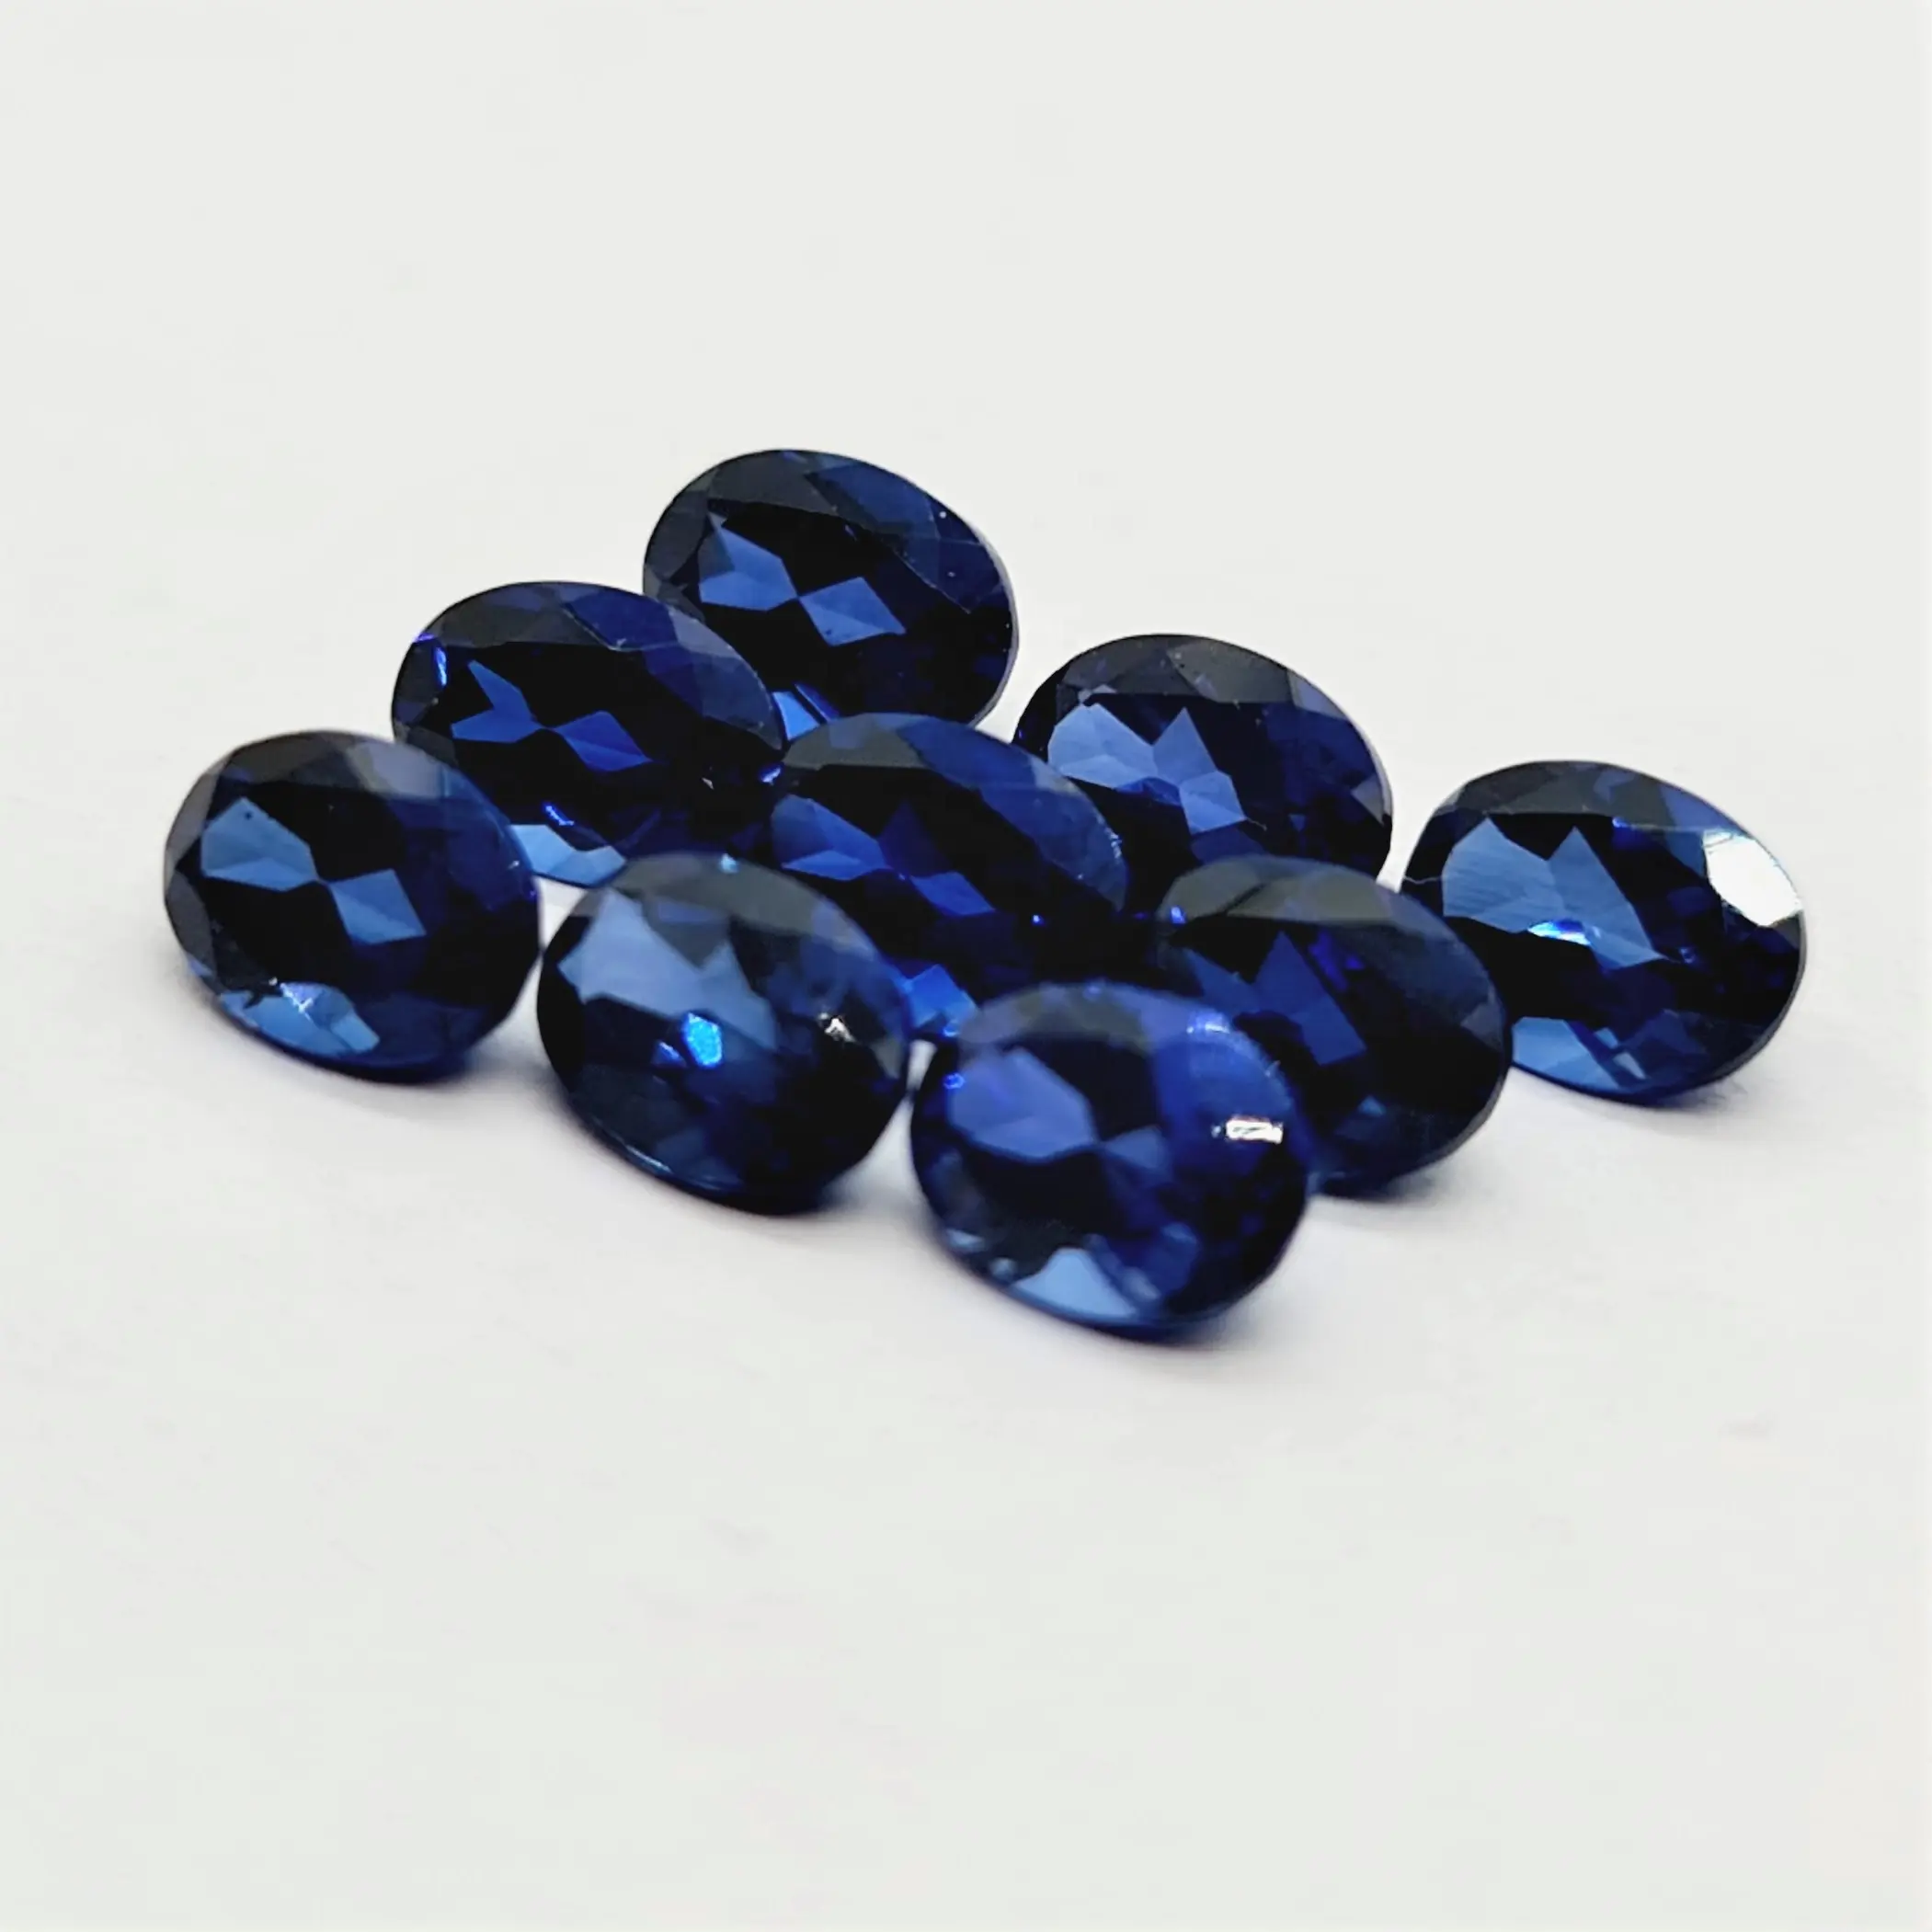 Oval Cut Lab Made Blue Sapphire Gemstone Oval Cut Calibrated Sizes And All Shapes And Sizes Cut On Custom Orders In Wholesale Pr